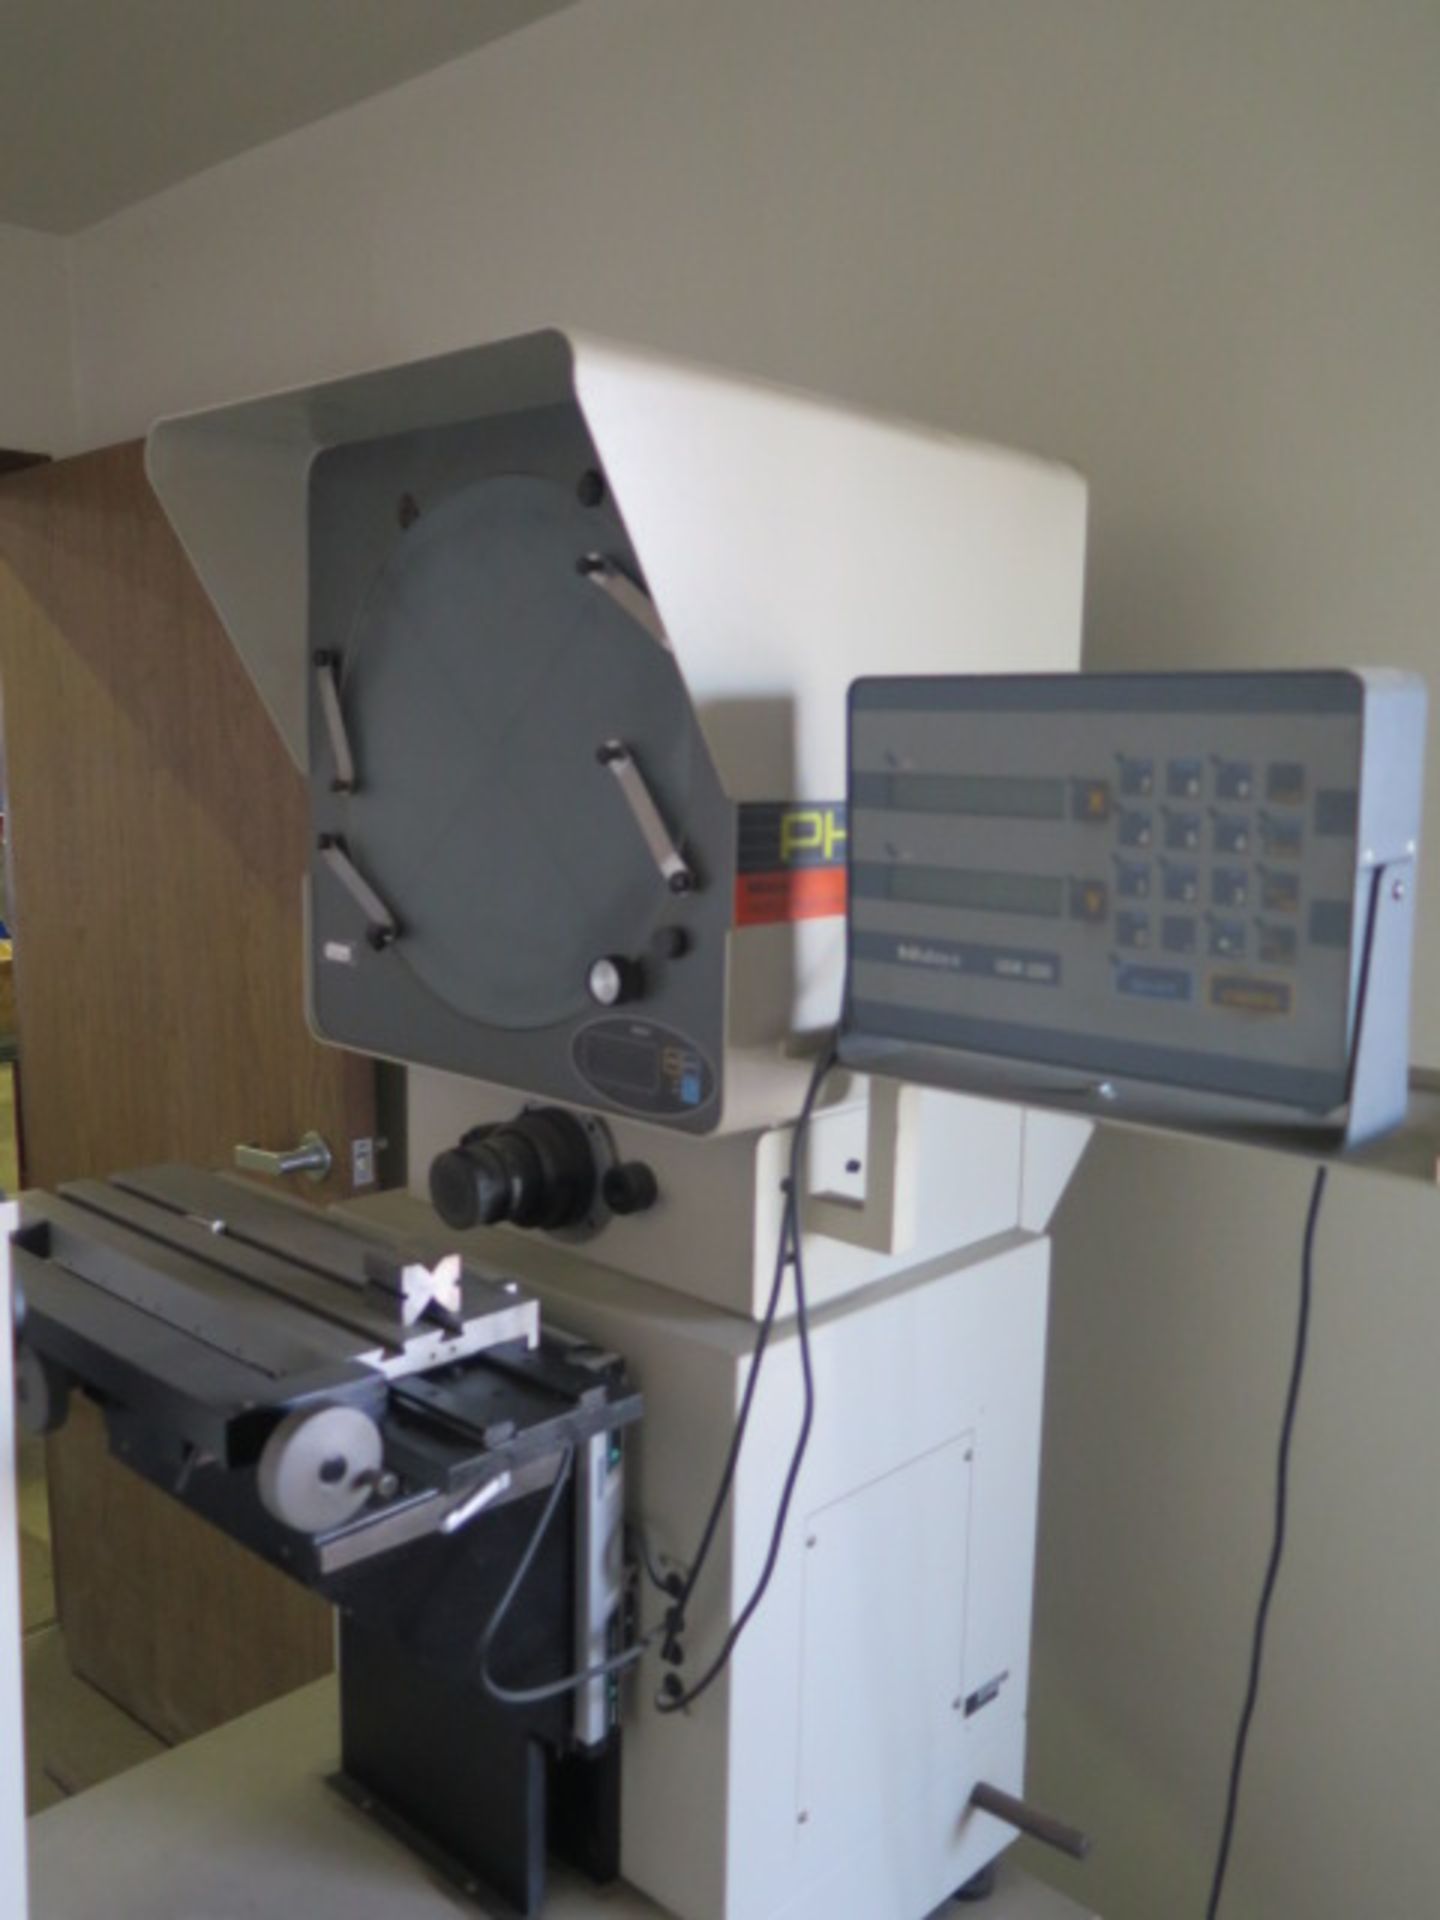 Mitutoyo PH-3500 14” Optical Comparator s/n 750161 w/ Mitutoyo UDR-220 Programmable DRO, Digital - Image 3 of 7